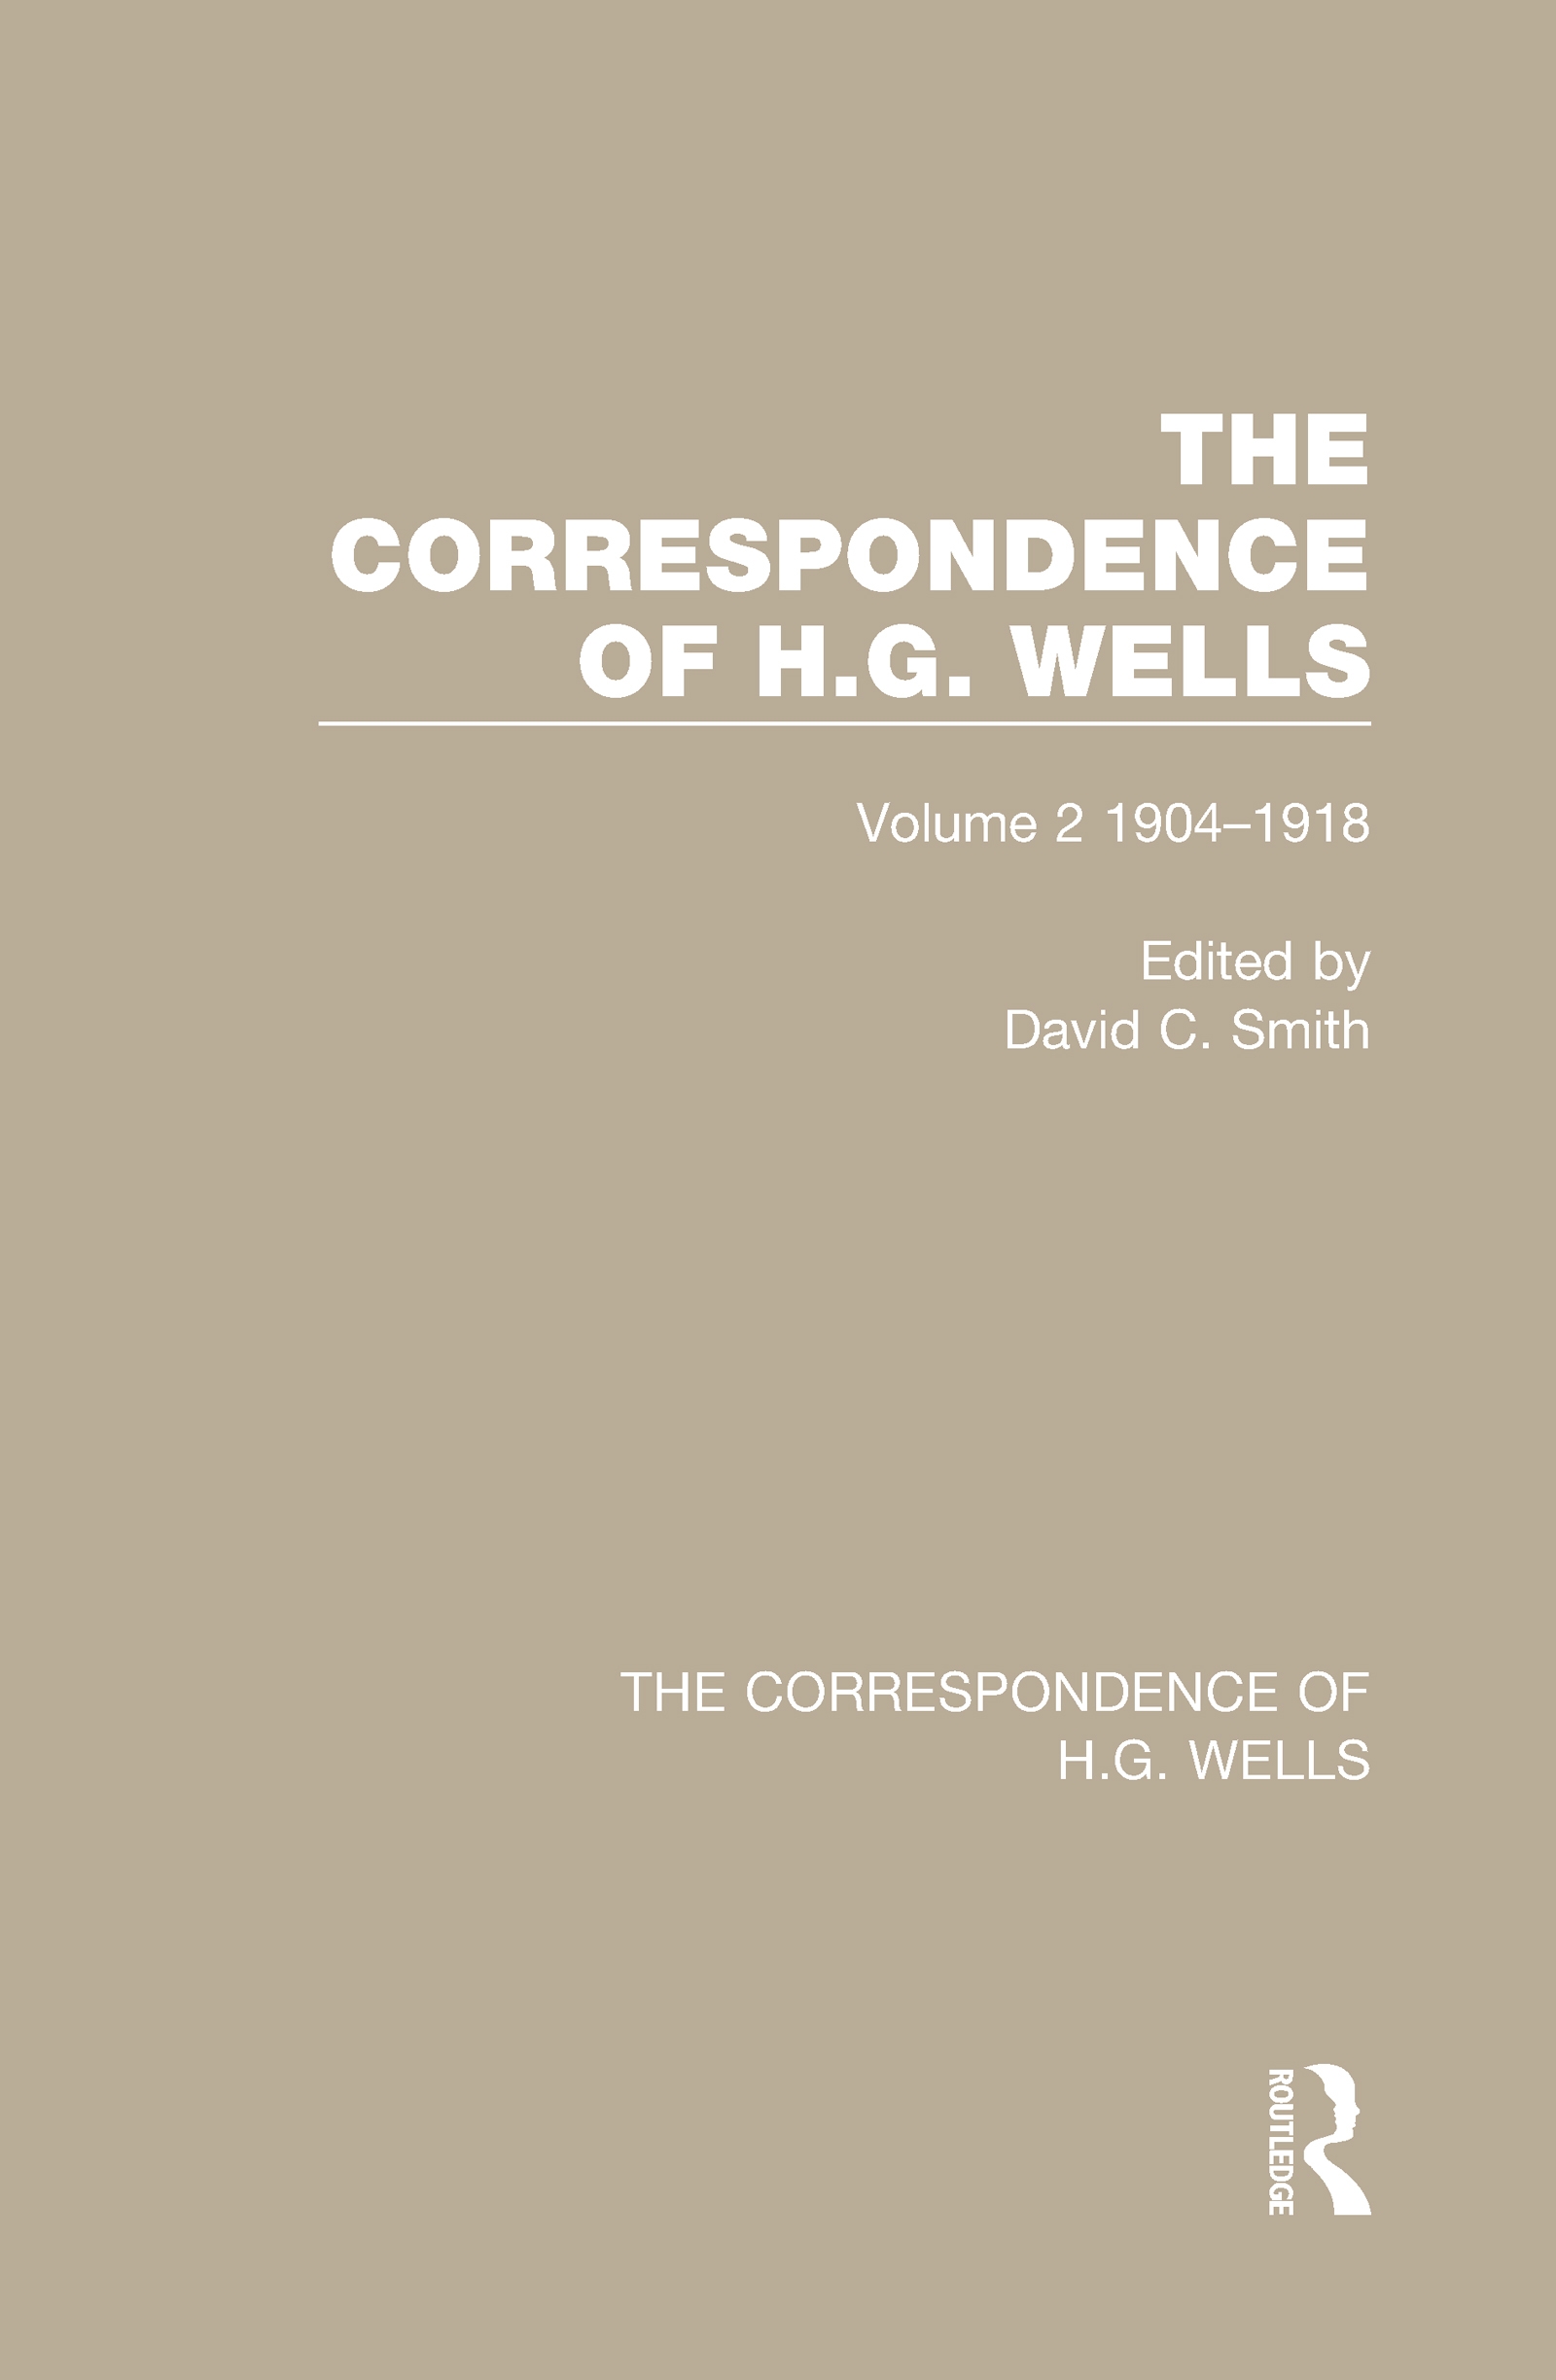 The Correspondence of H.G. Wells: Volume 2 1904-1918